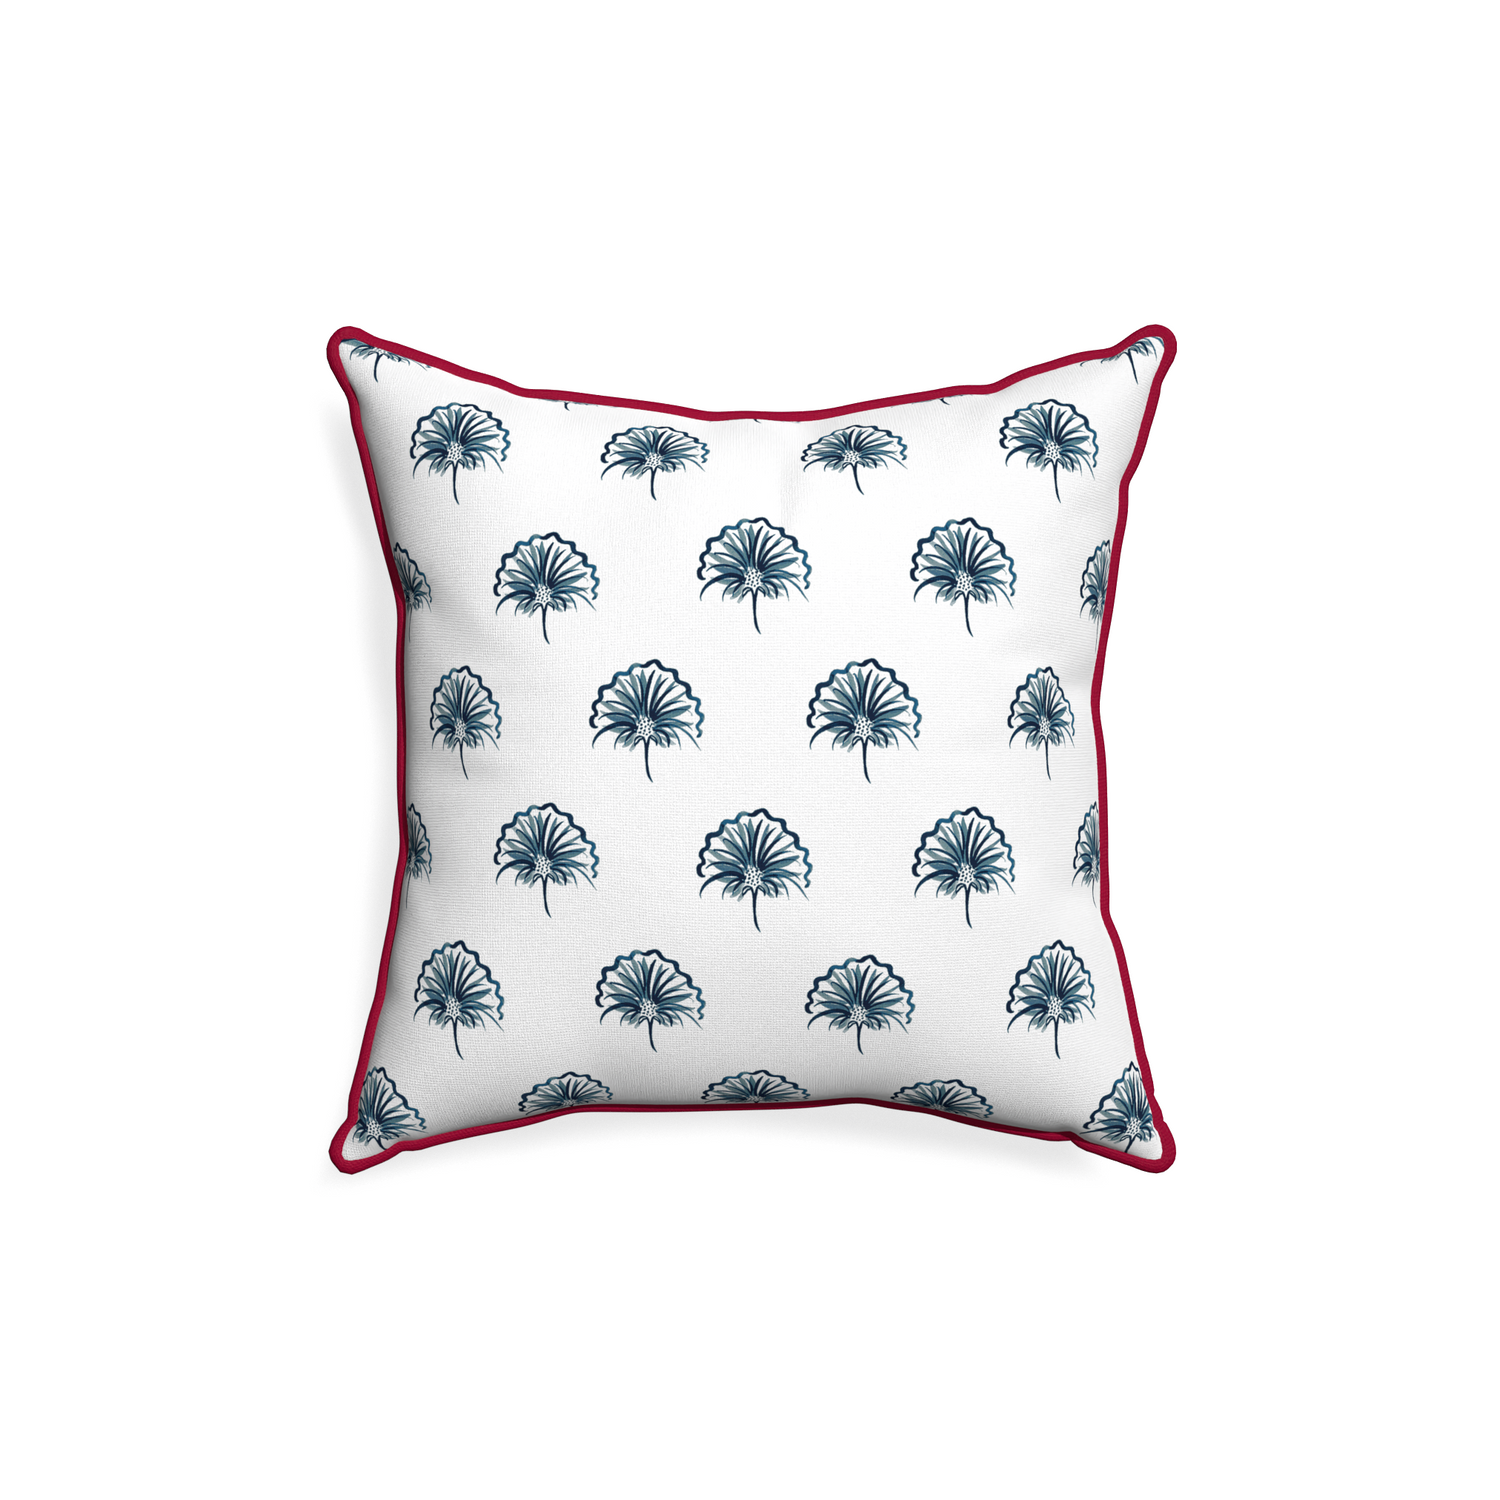 18-square penelope midnight custom pillow with raspberry piping on white background